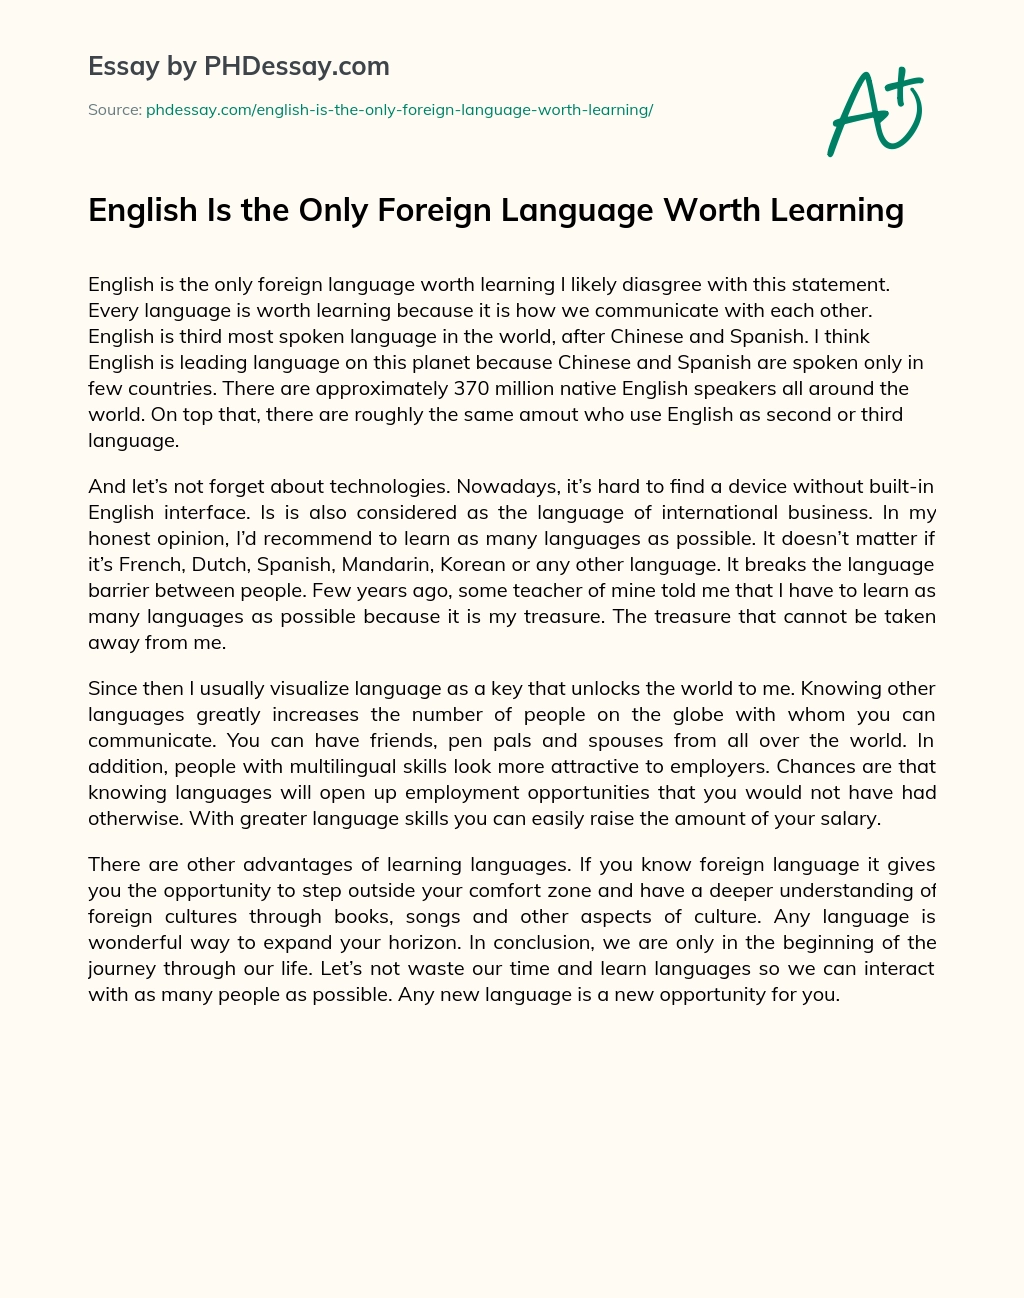 essay about the foreign languages